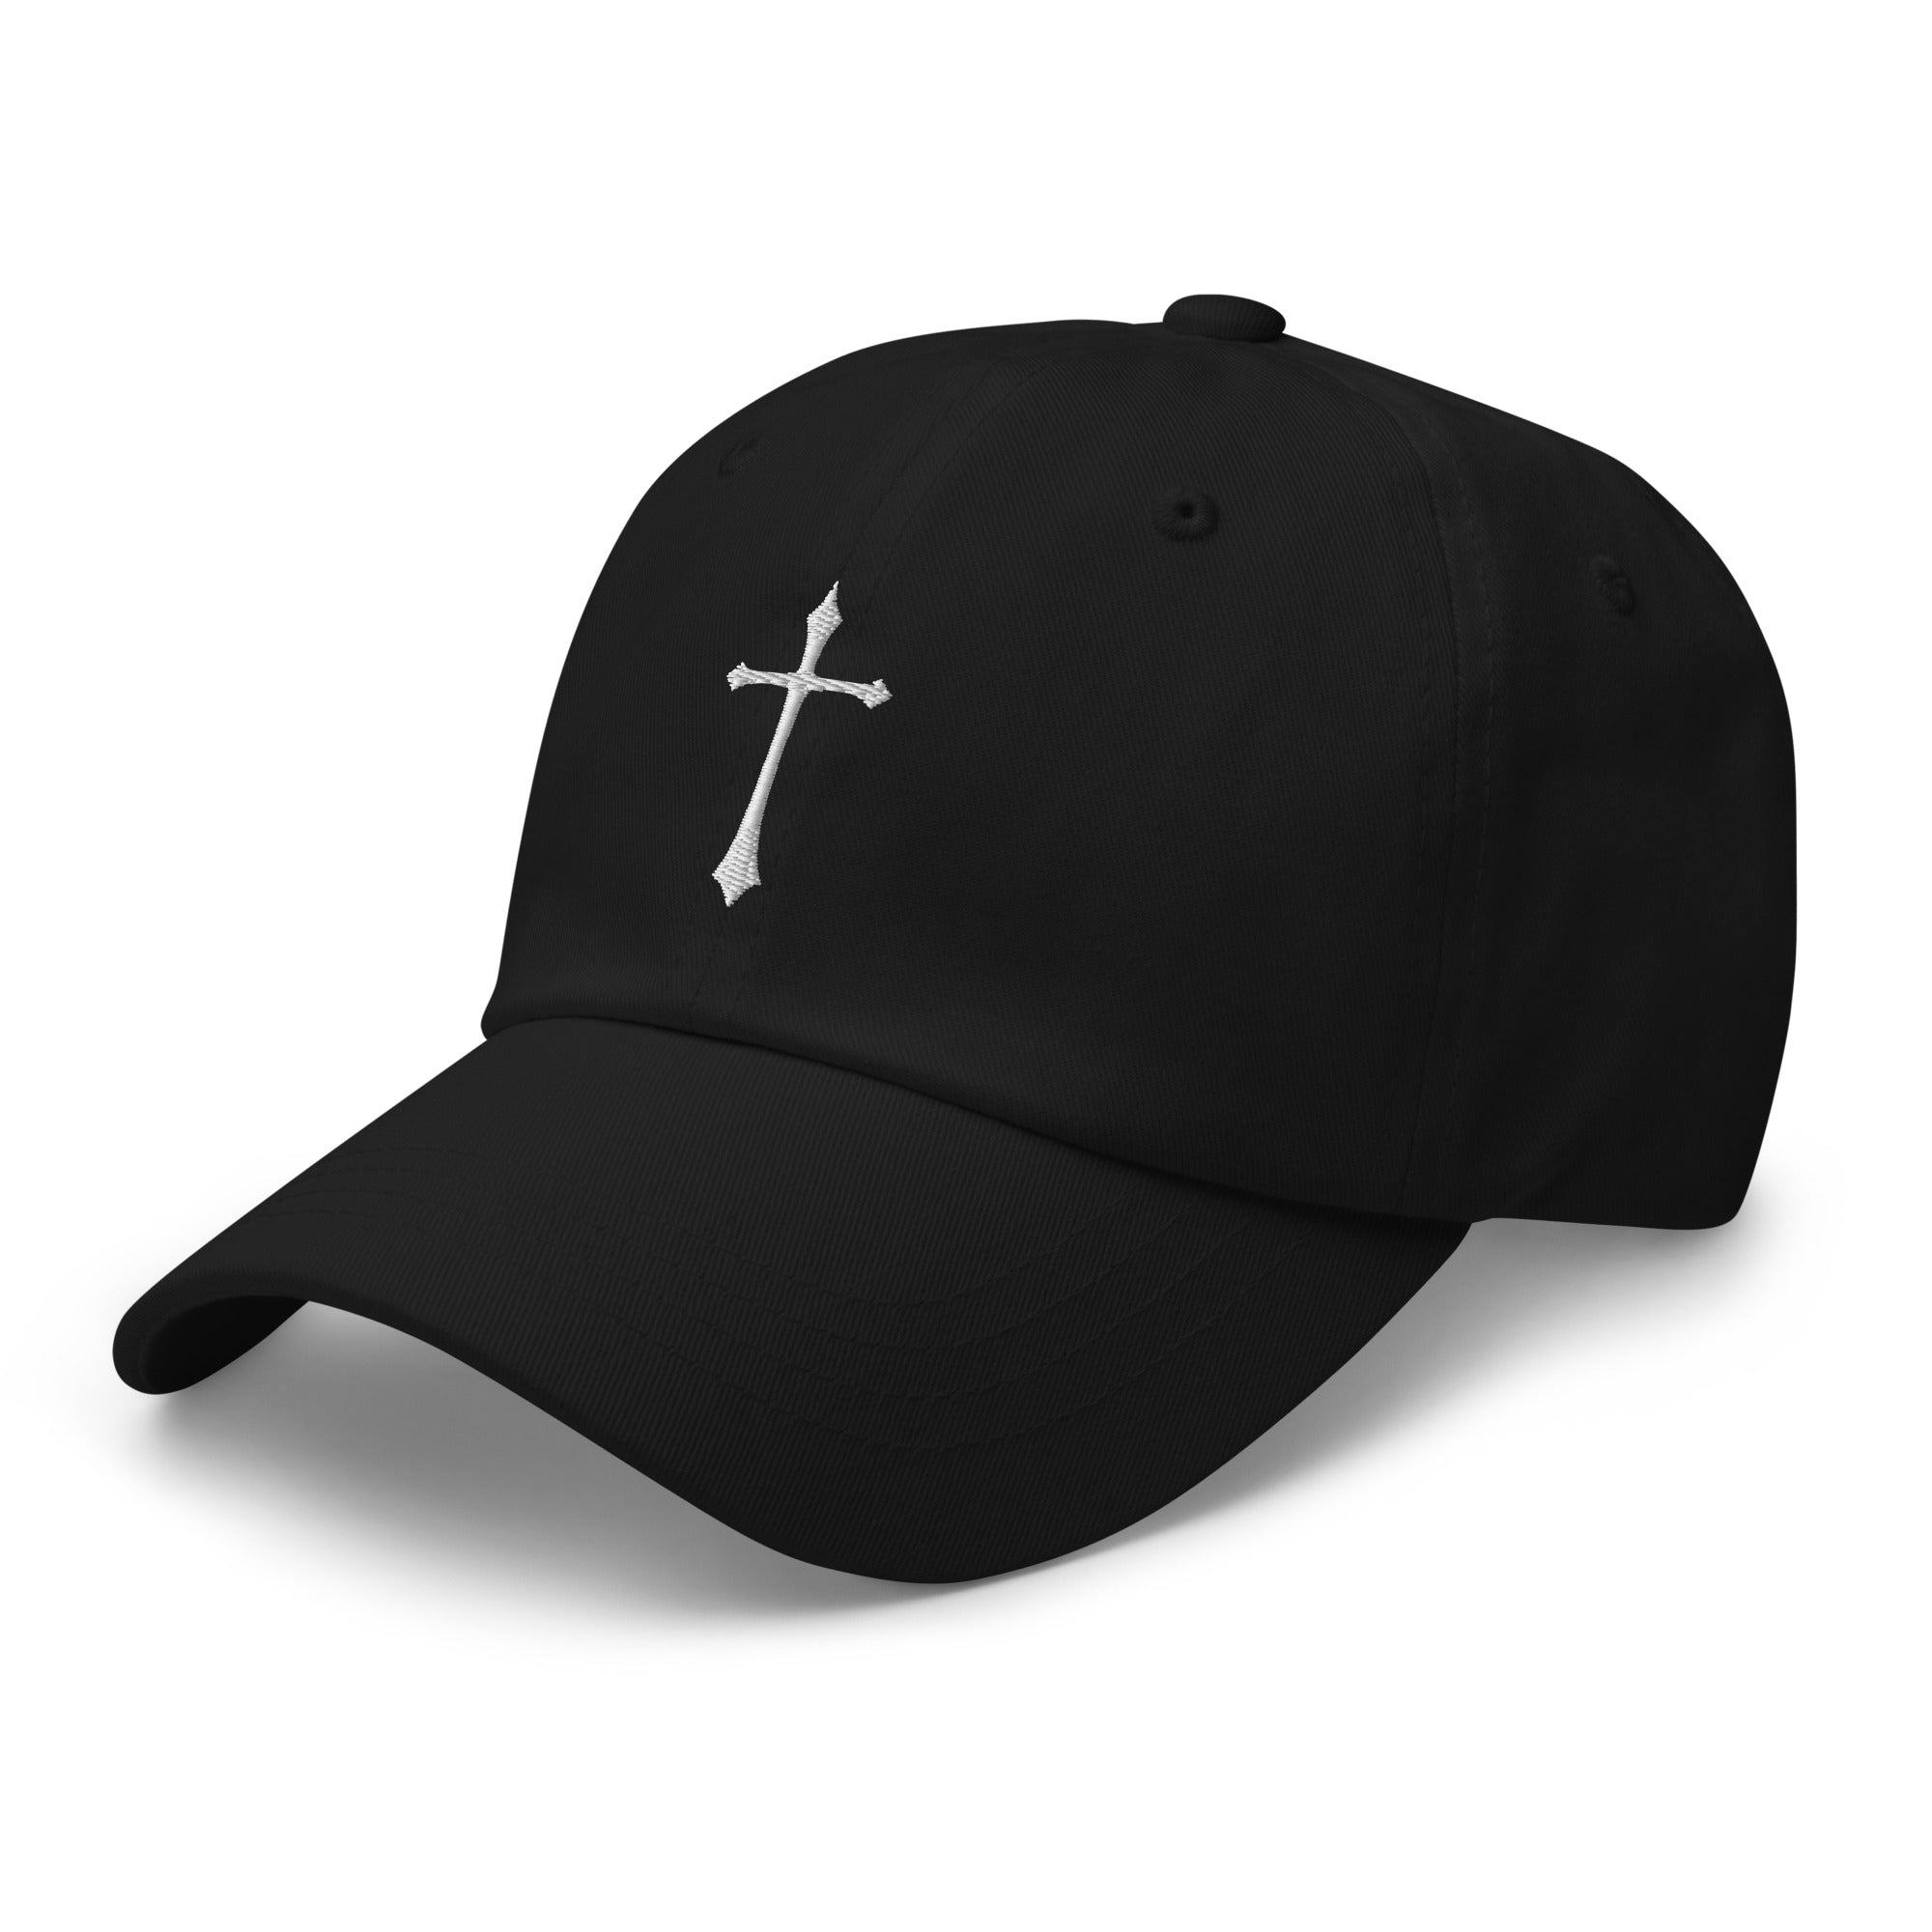 White Gothic Ancient Medeival Cross Embroidered Baseball Cap Dad hat - Edge of Life Designs